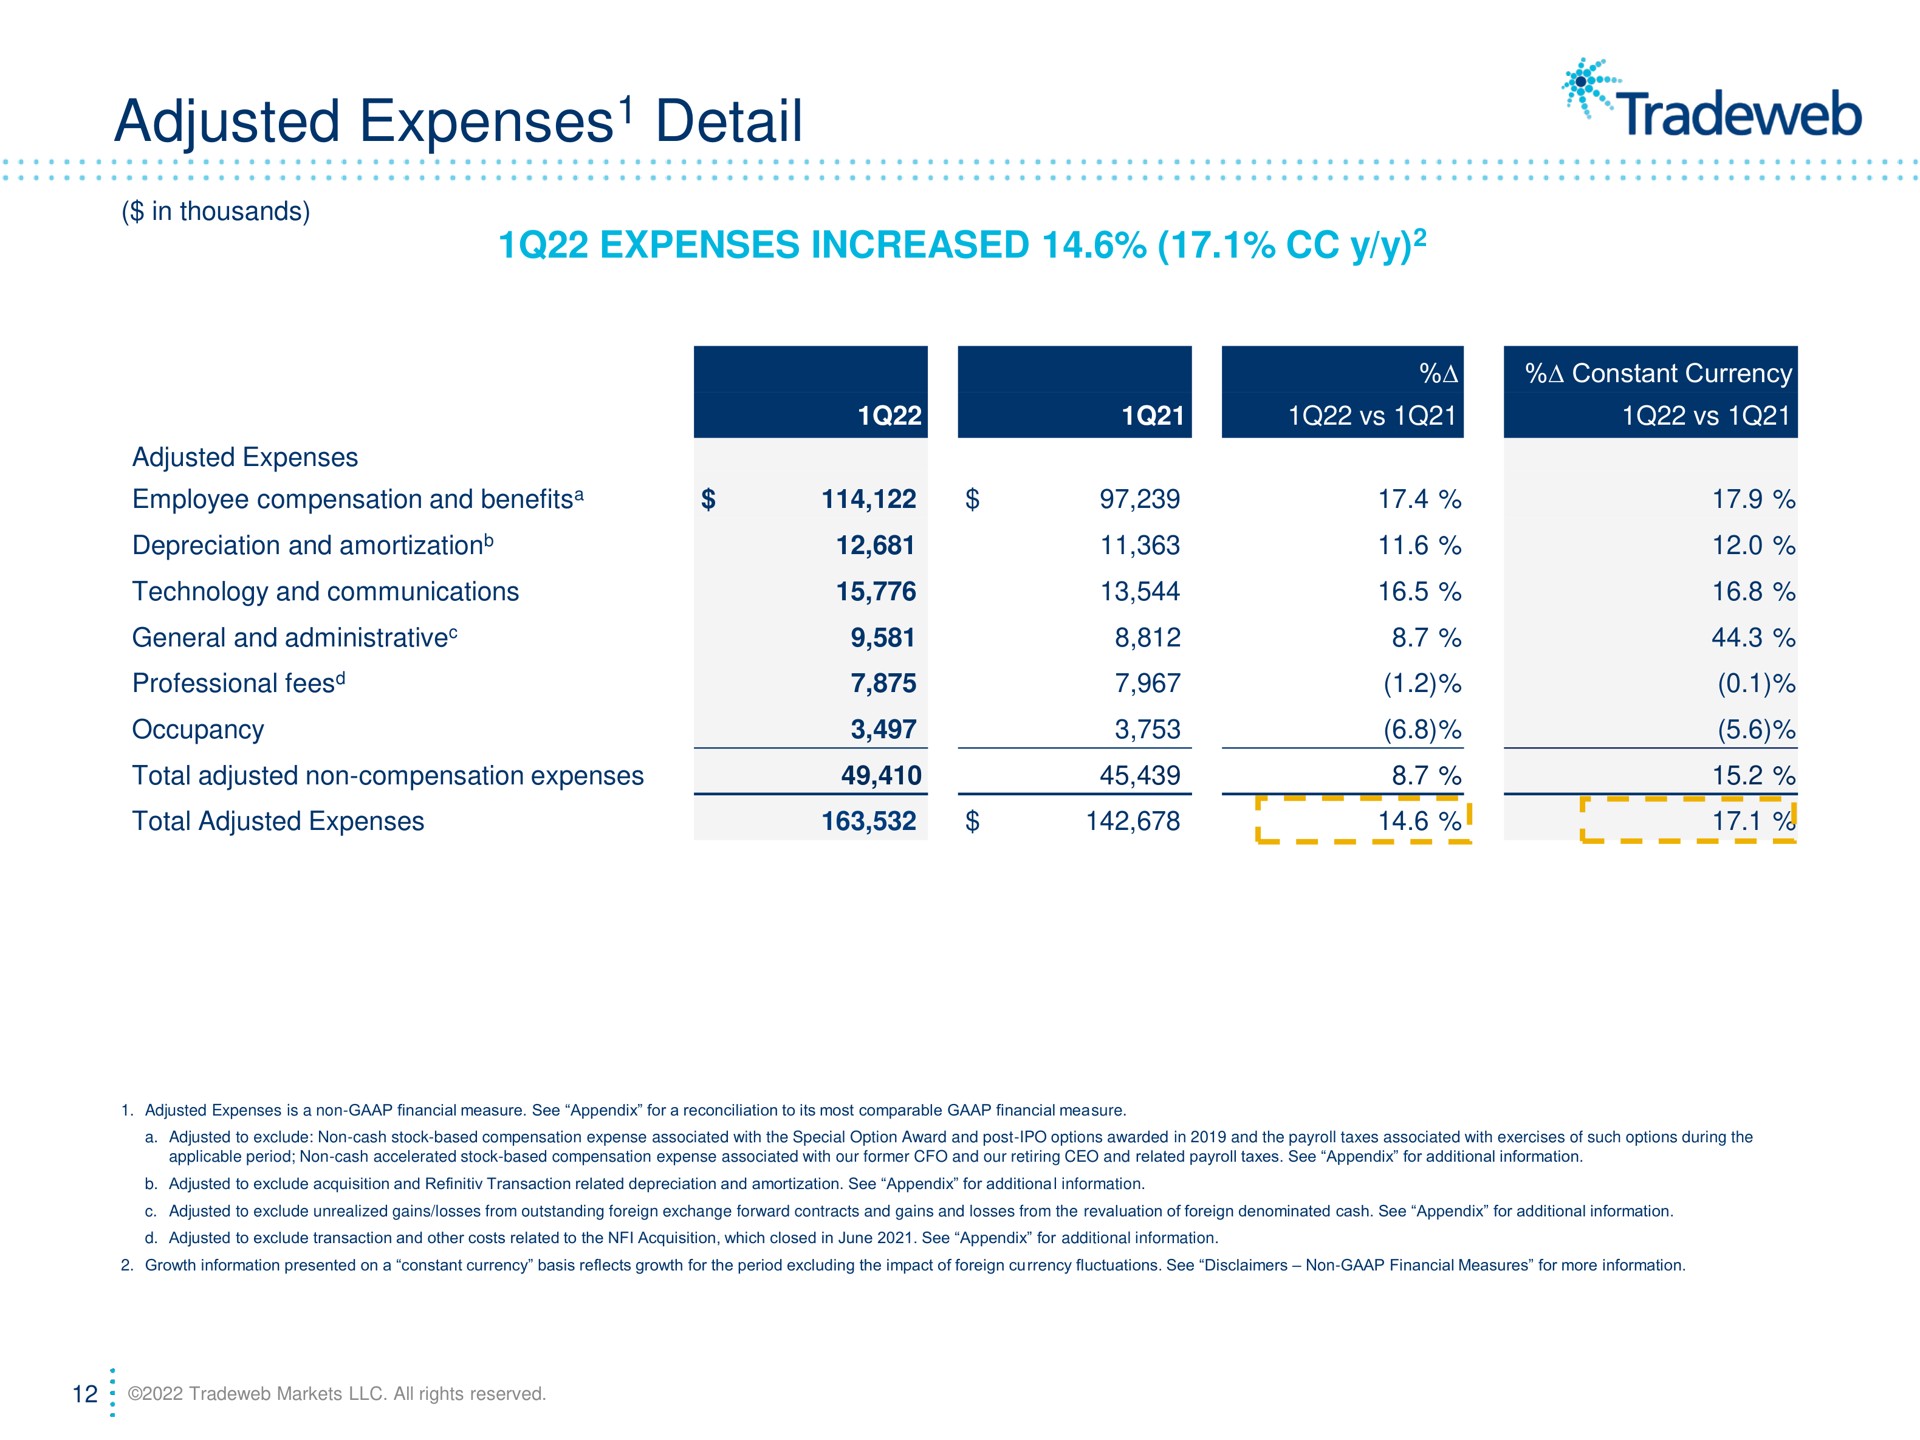 adjusted expenses detail expenses increased | Tradeweb